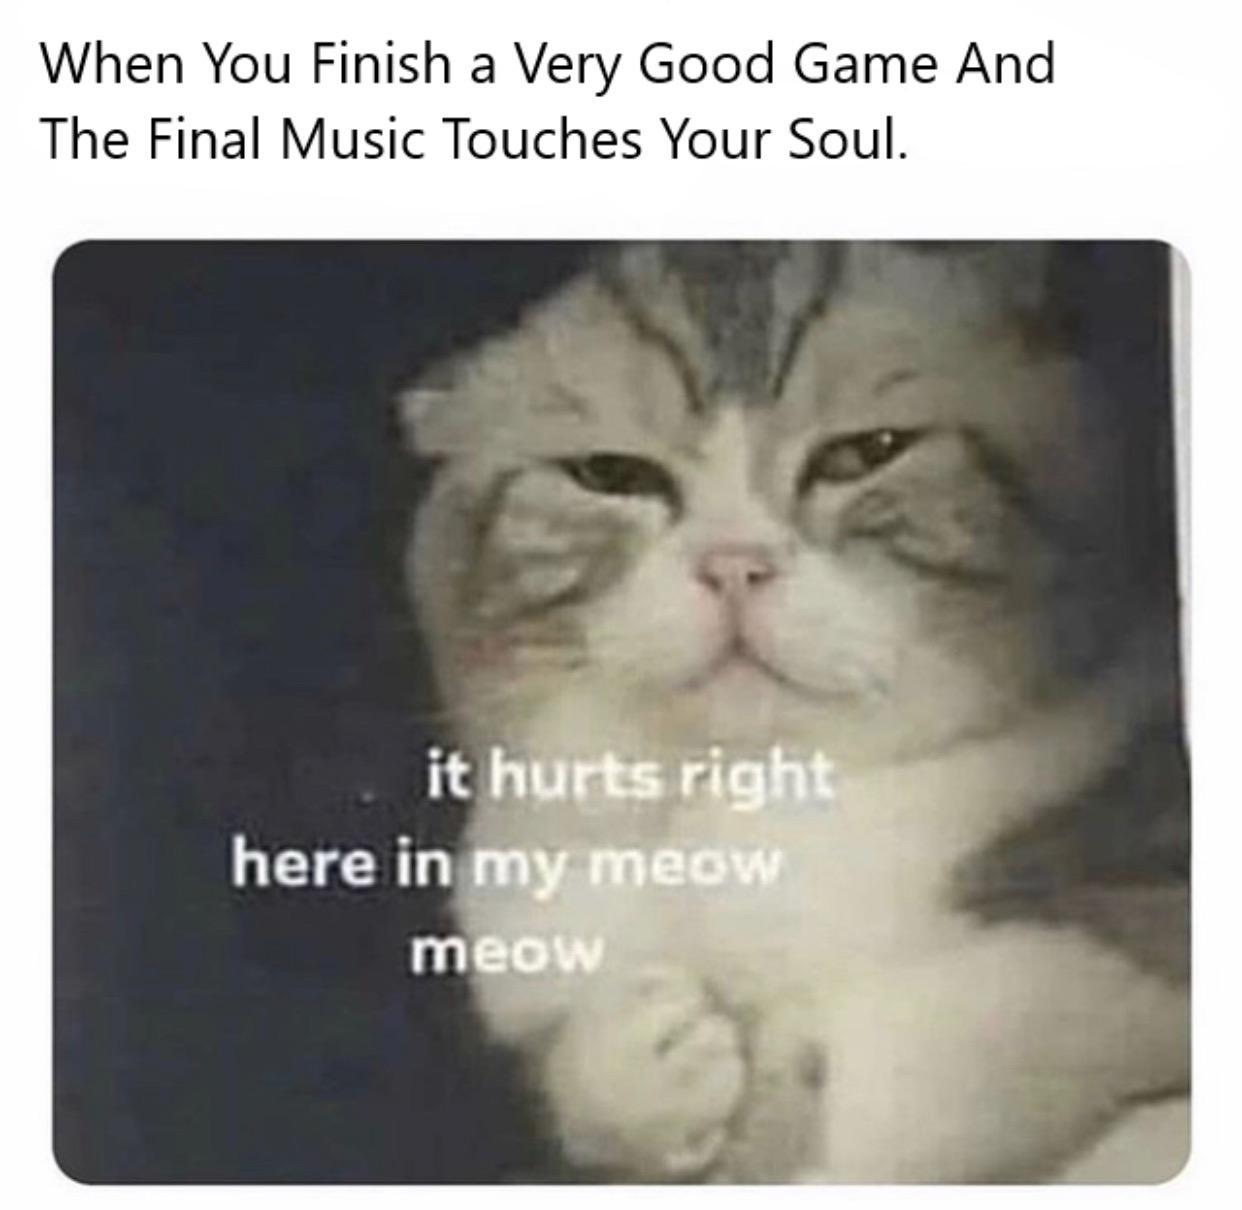 funny gaming memes - hurts in my meow meow - When You Finish a Very Good Game And The Final Music Touches Your Soul. it hurts right here in my meow meow